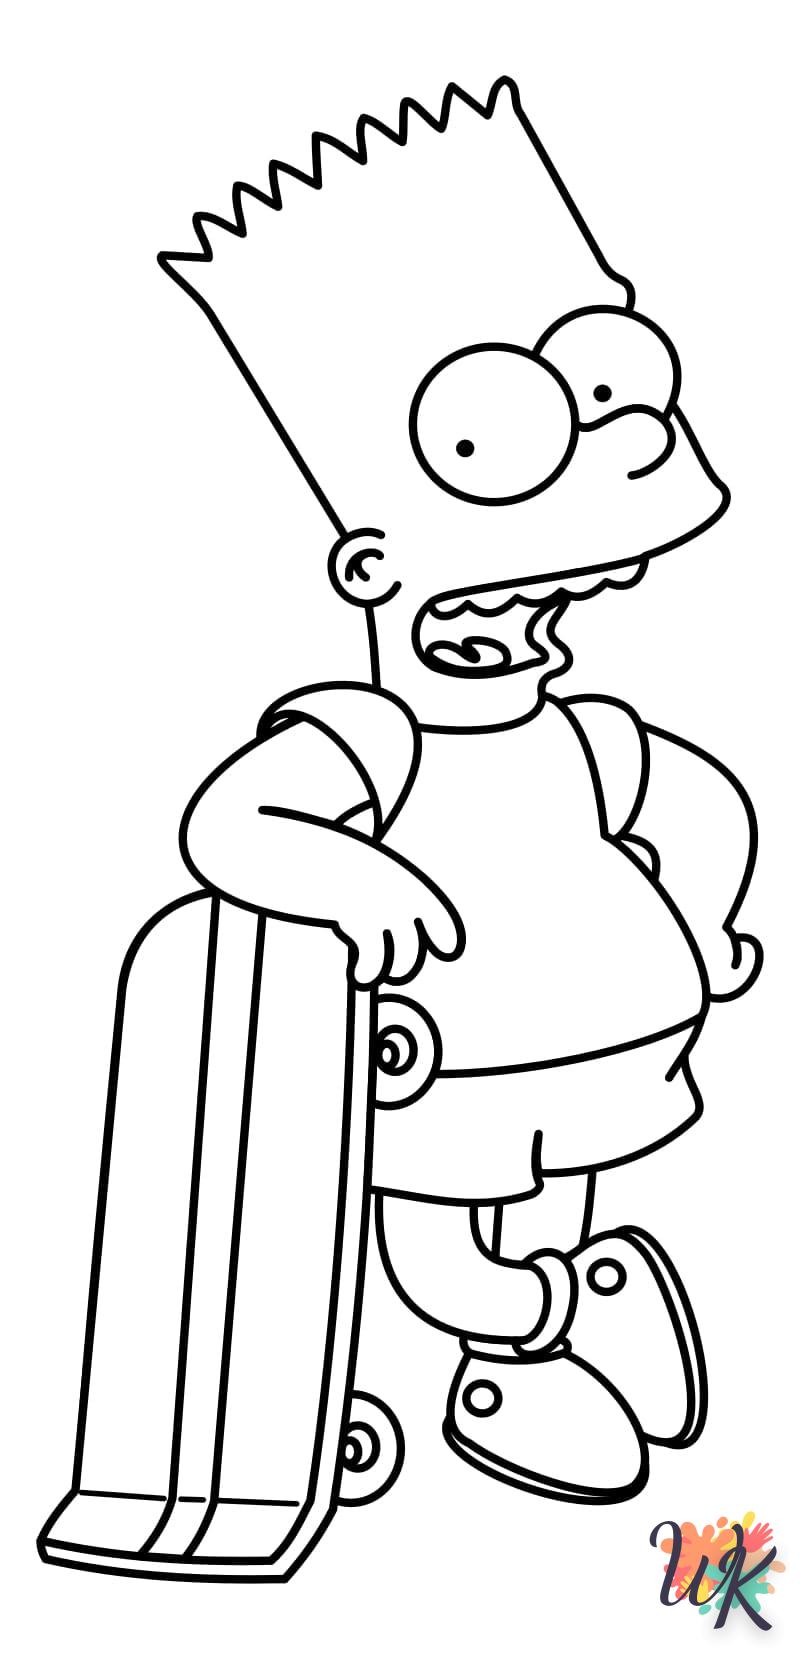 Coloriage Simpsons 52